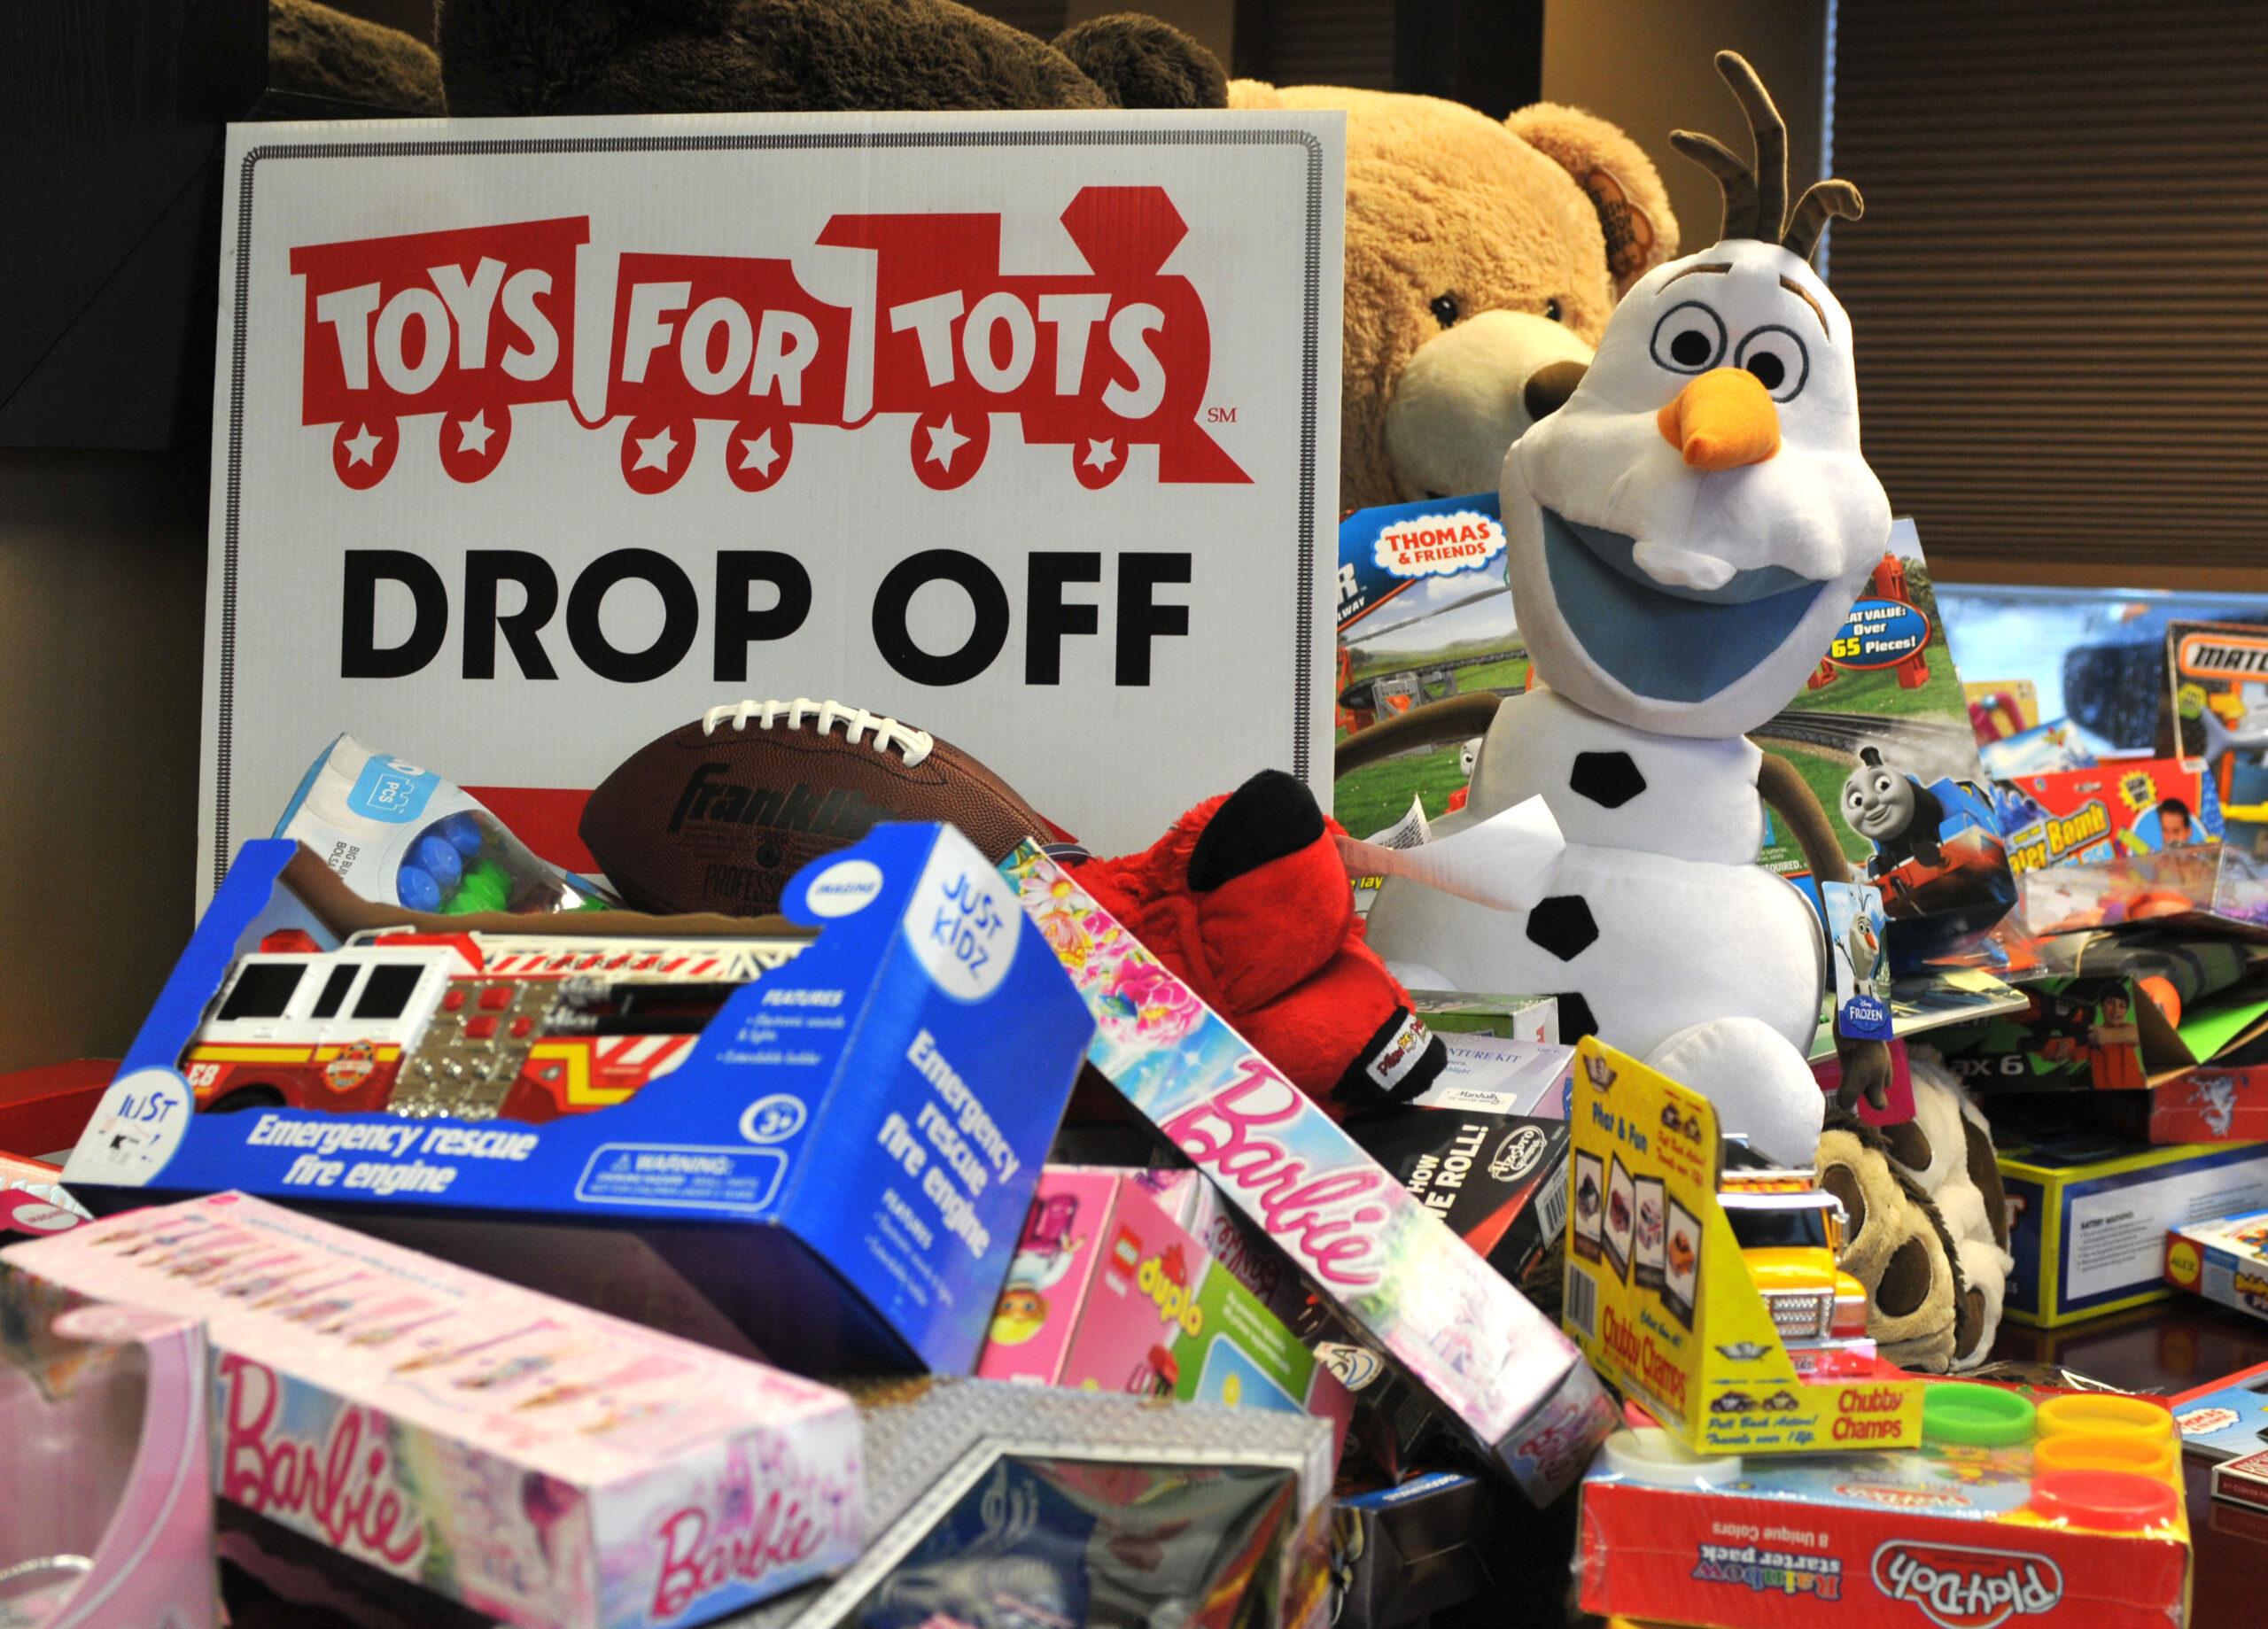 toys for tots drop off with a variety of toys and games for children